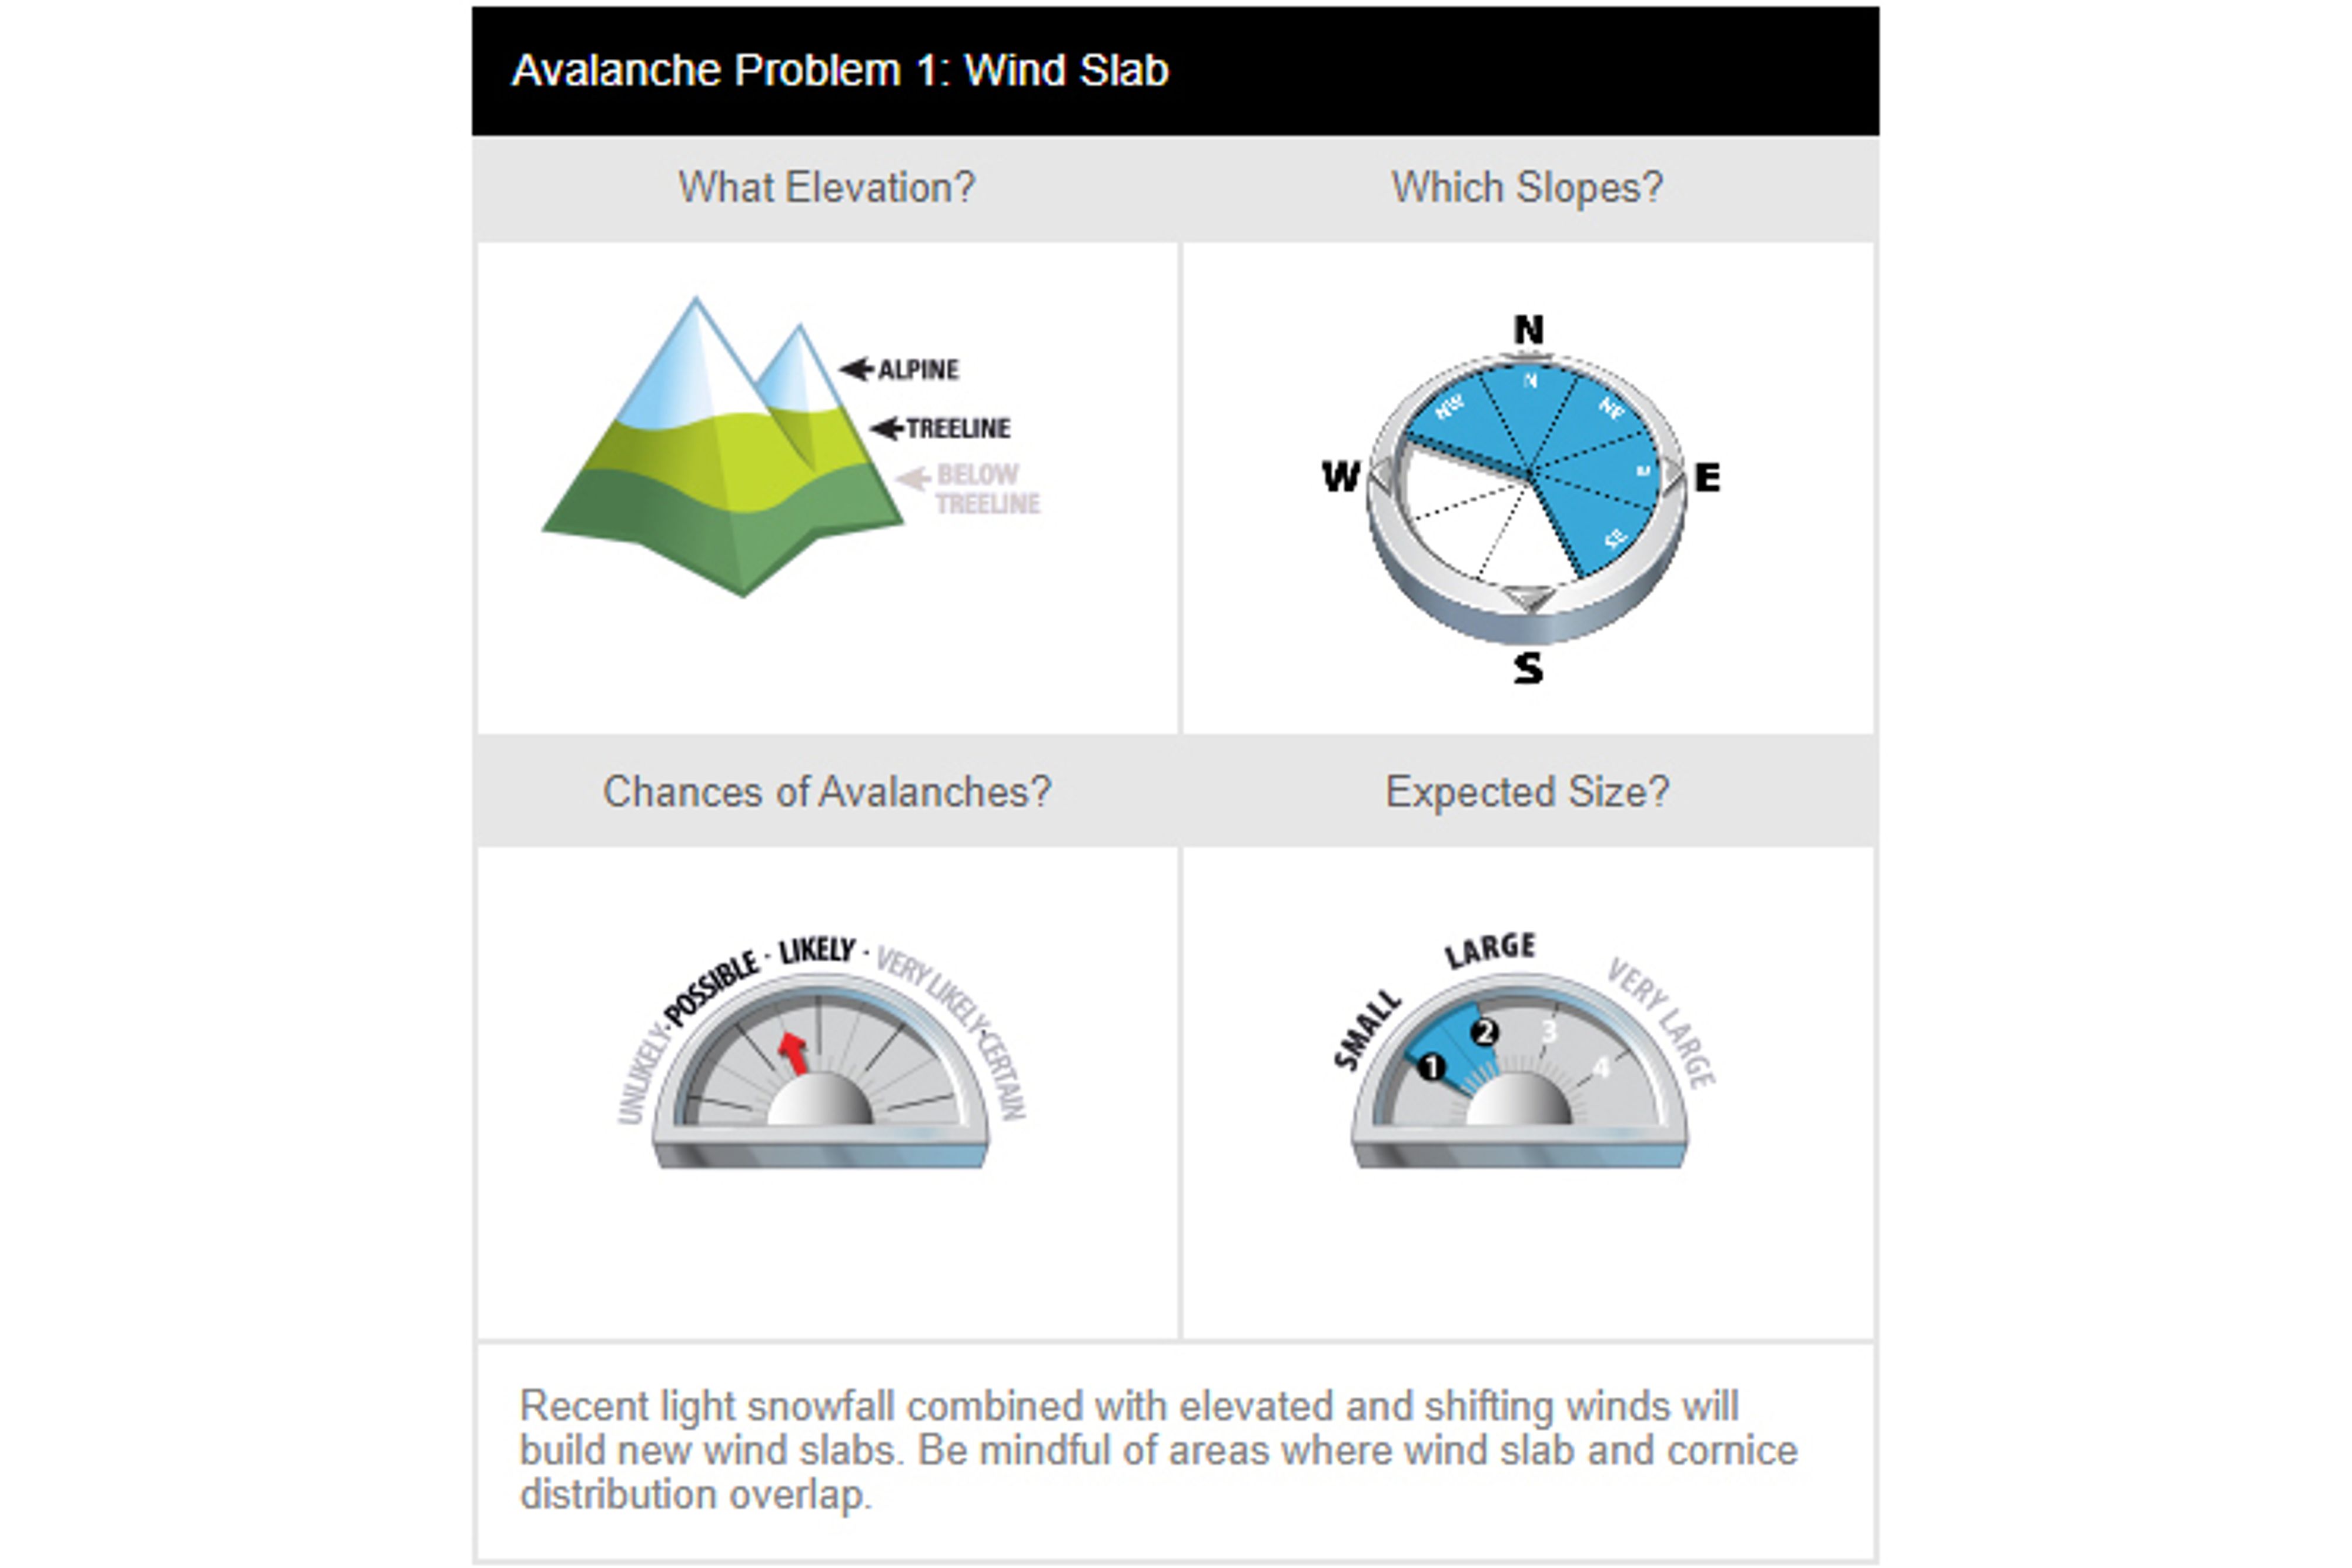 Click on the different elements to learn more about how avalanche problems are presented in the forecast.